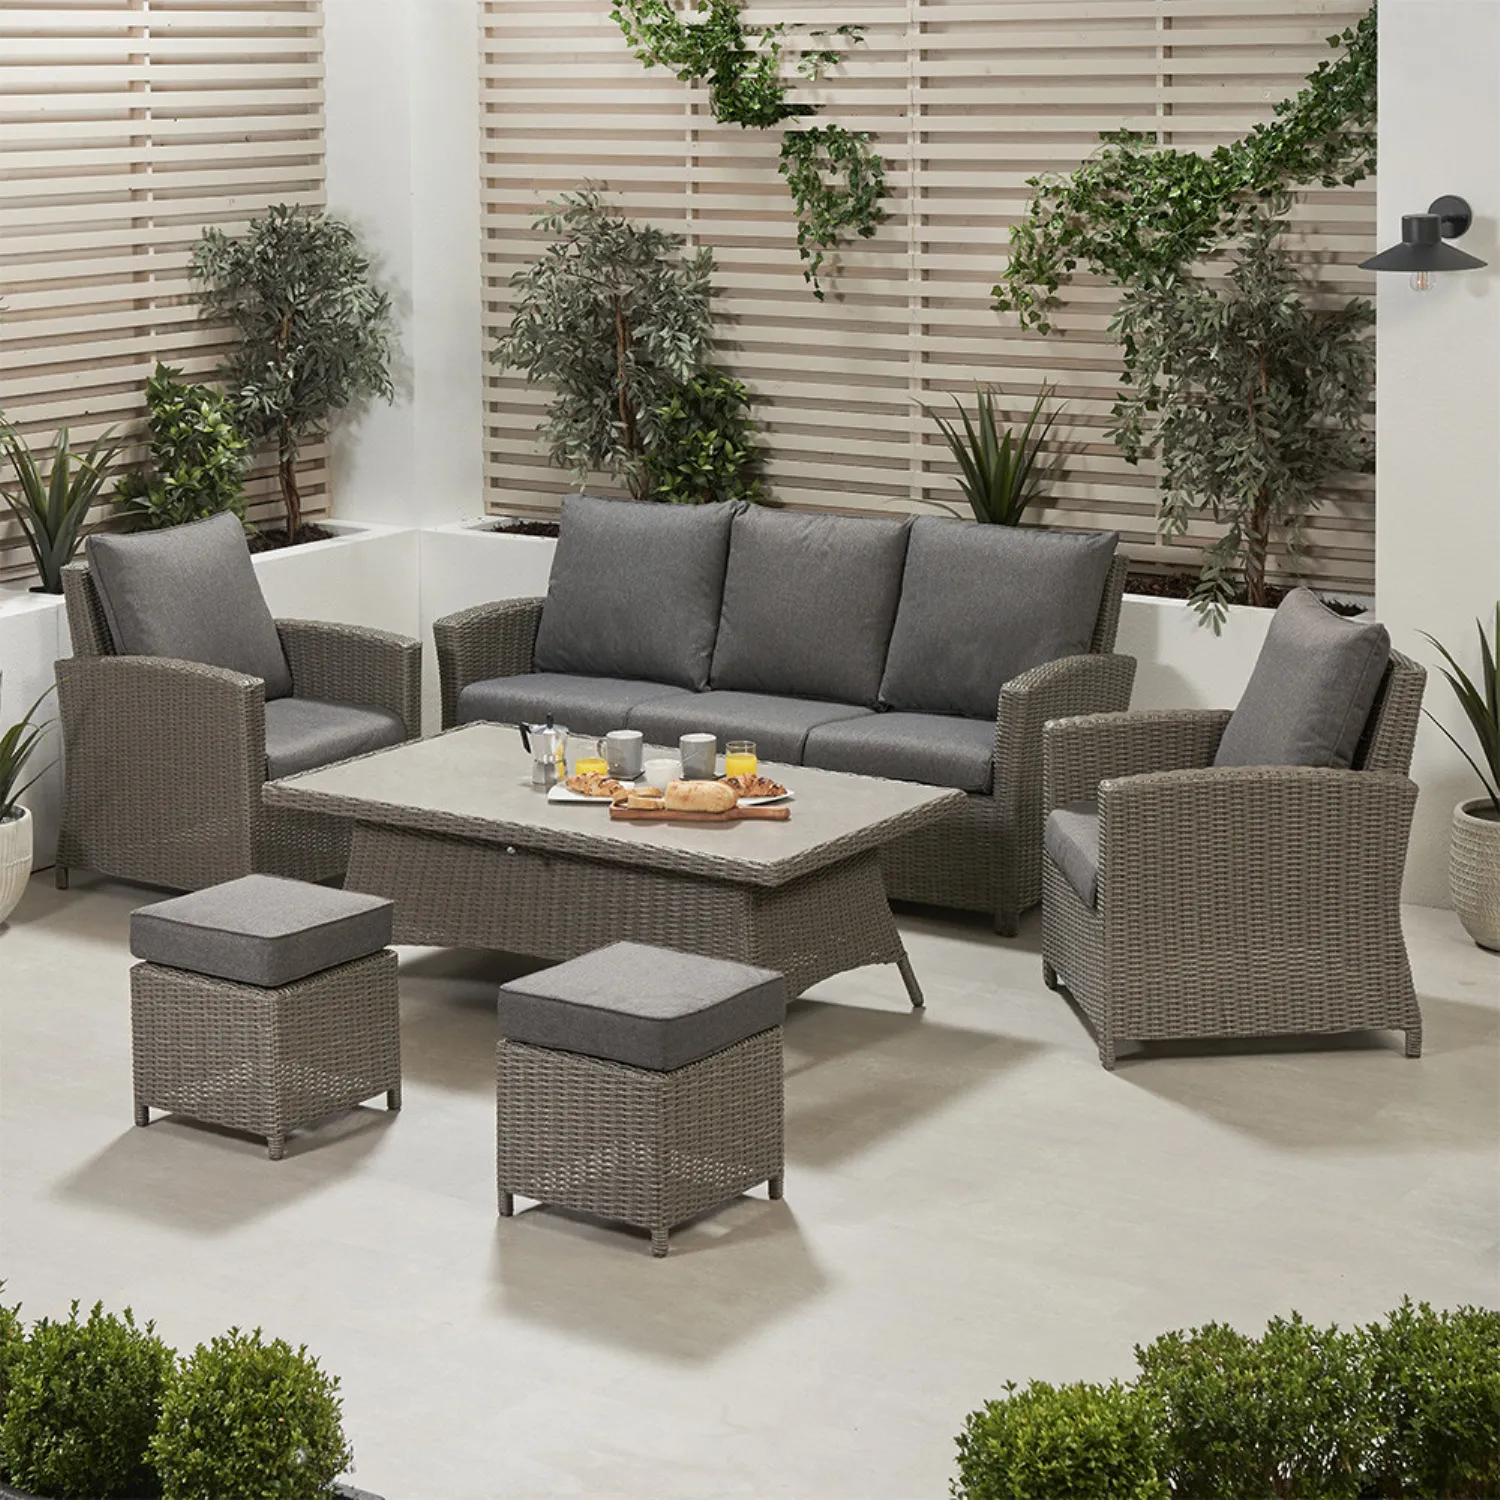 Grey Rattan Garden 3 Seater Lounge Sofa with Rising Table